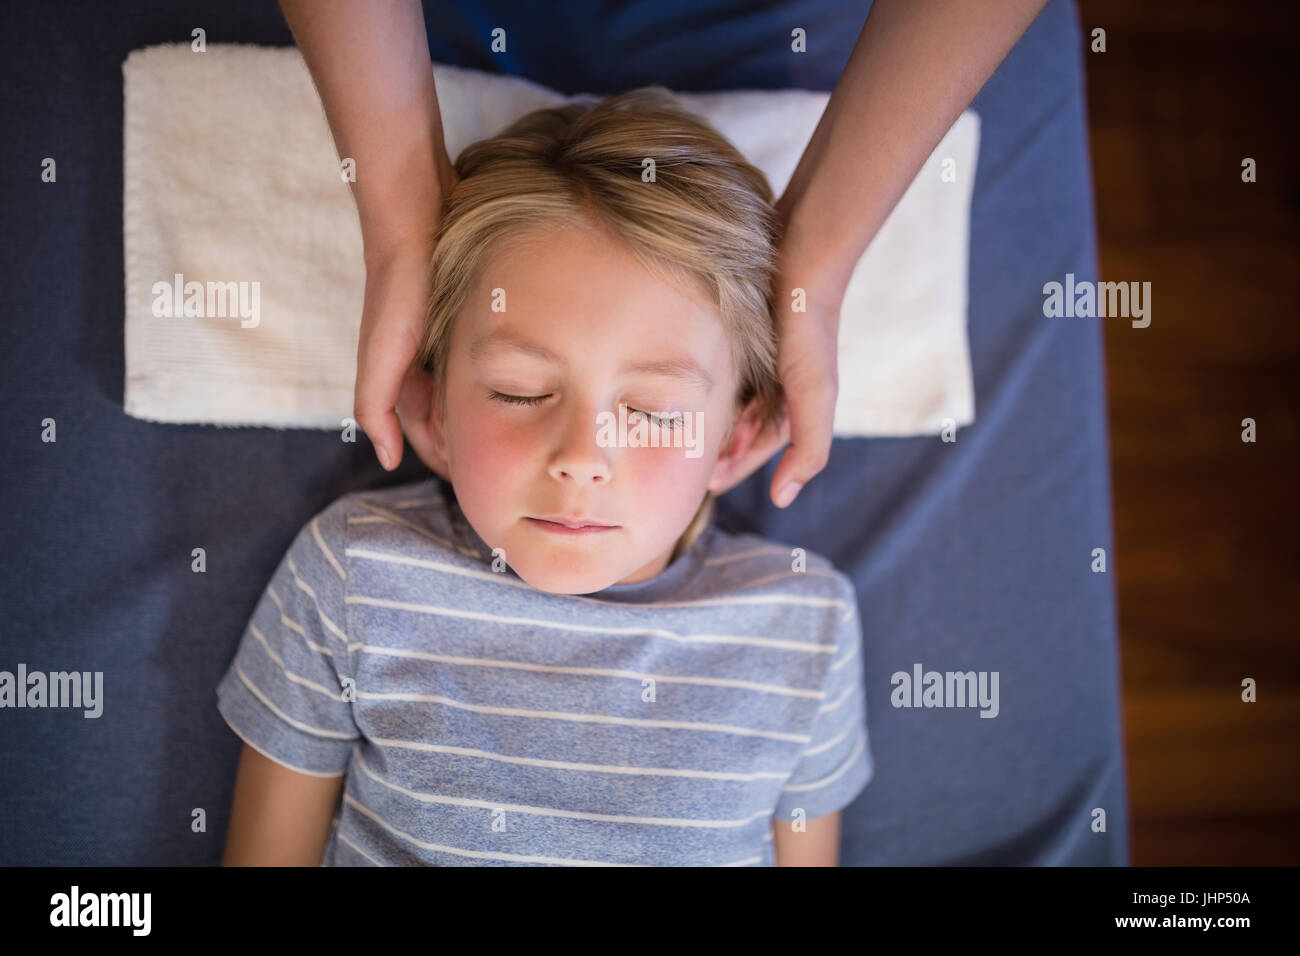 Overhead view of boy with eyes closed receiving neck massage from female therapist at hospital ward Stock Photo